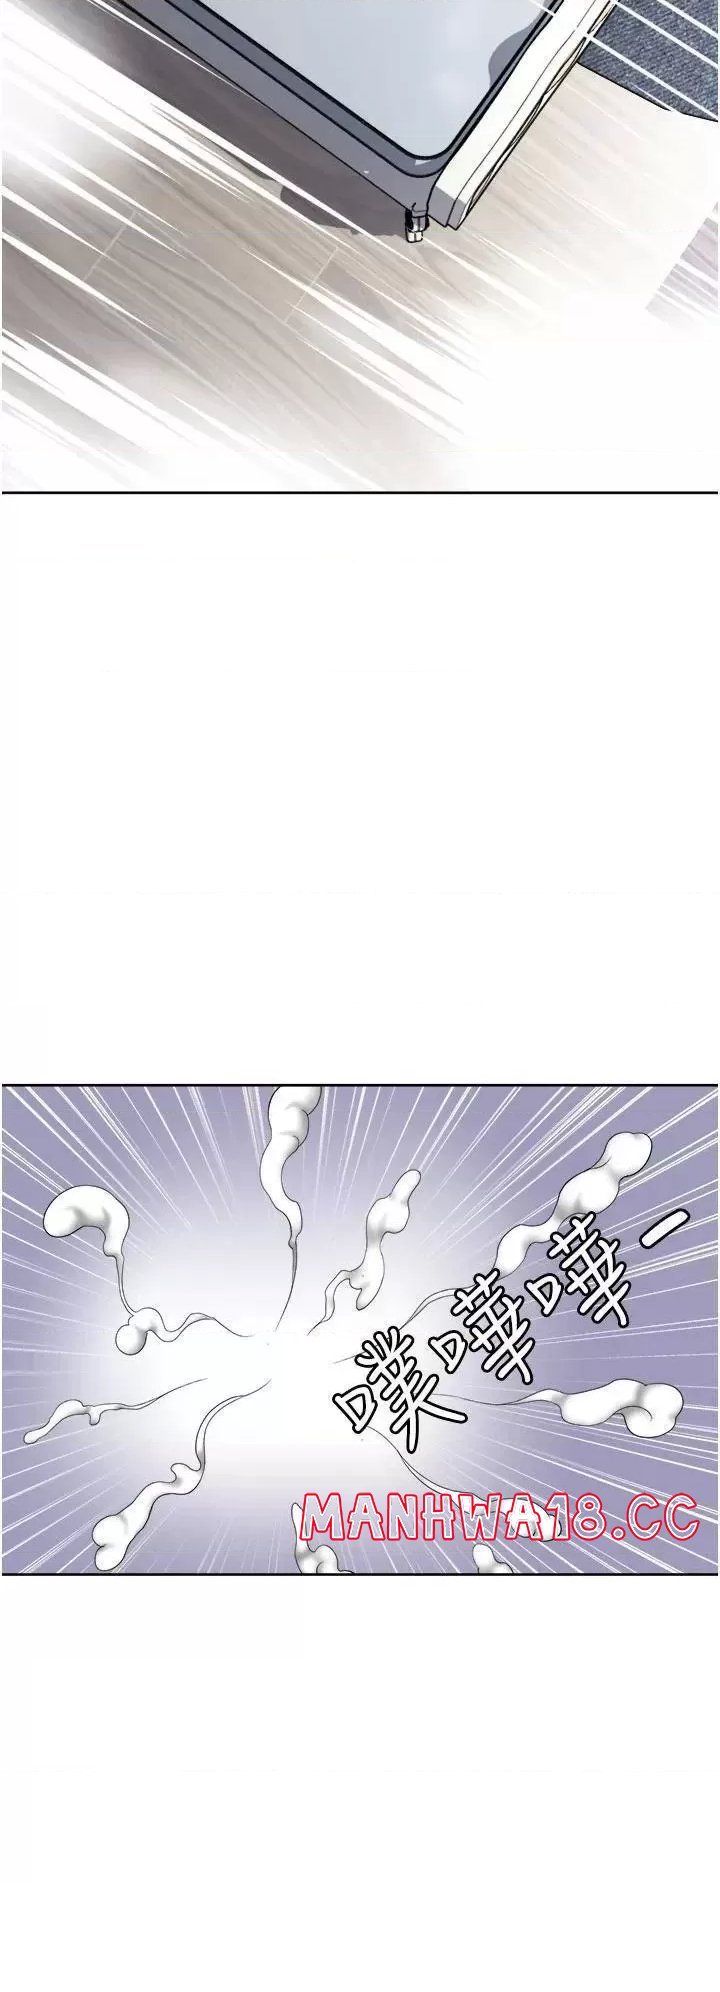 just-once-raw-chap-23-1